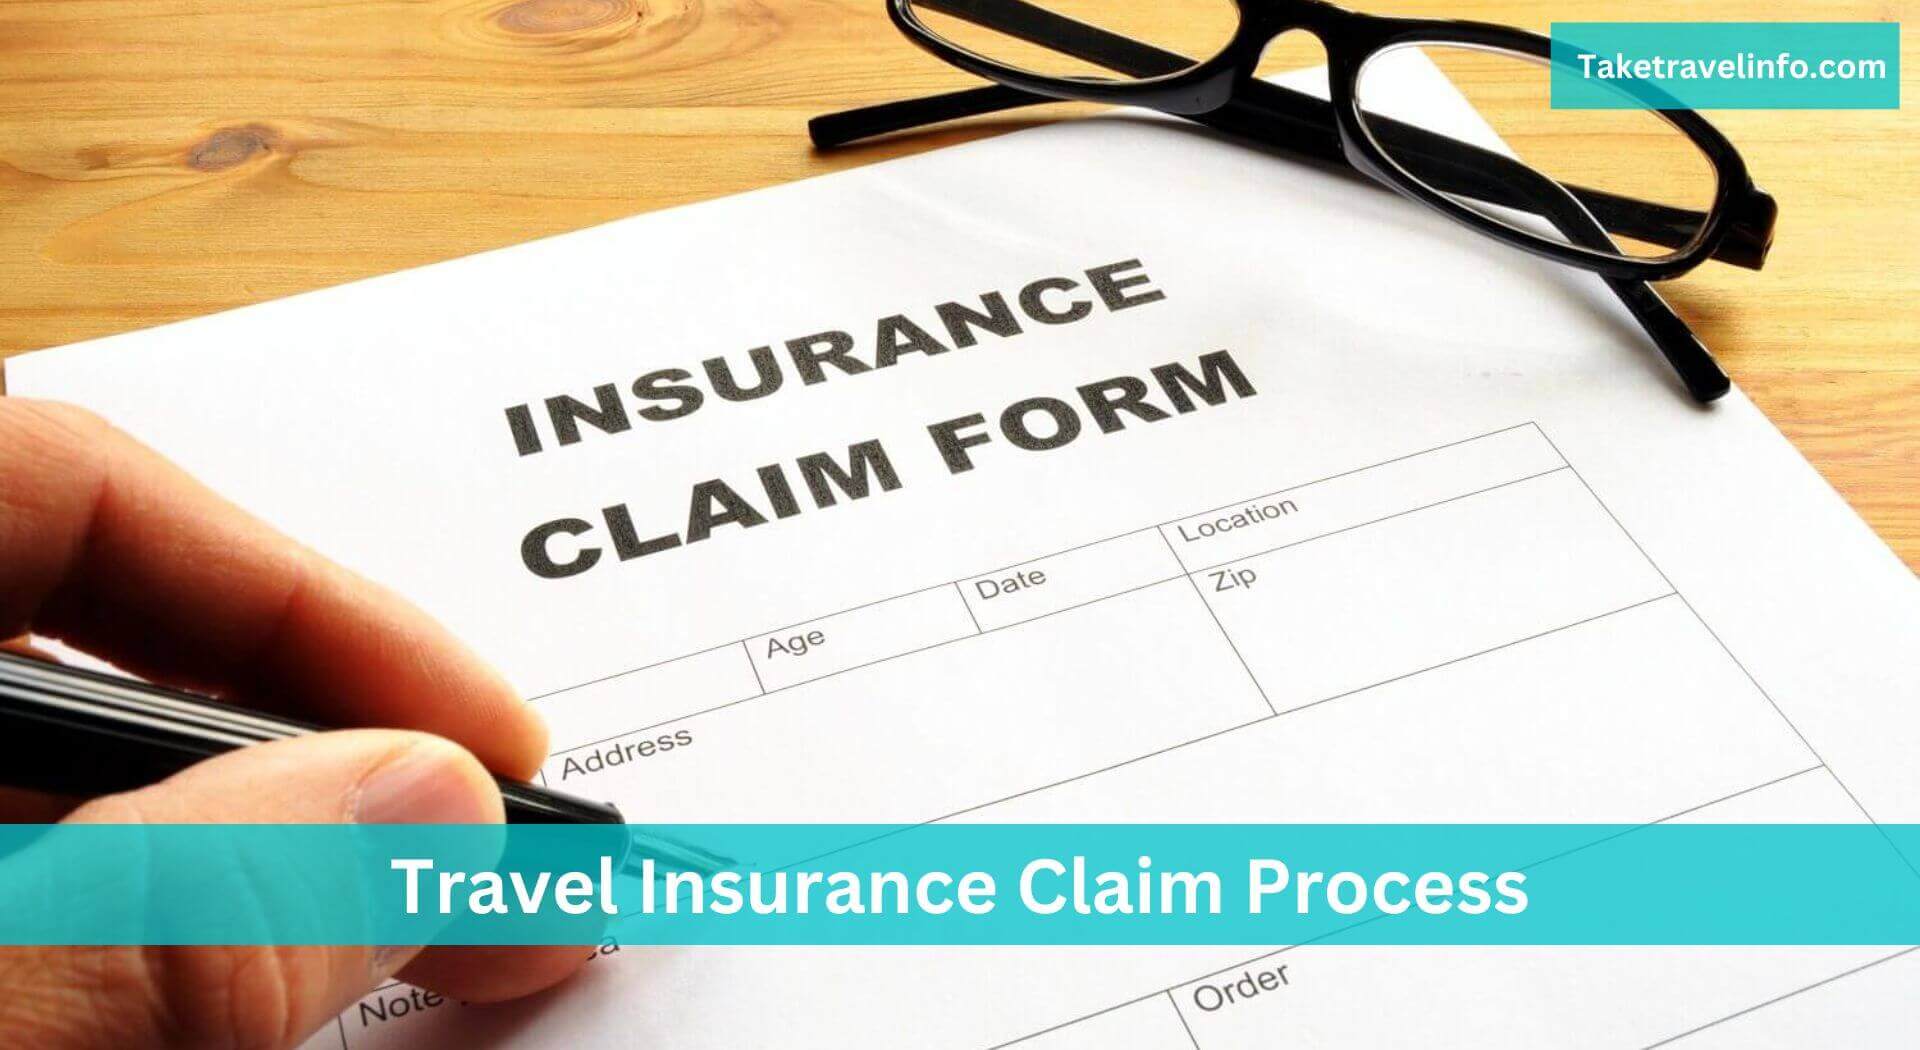 How Long Does a Travel Insurance Claim Take?